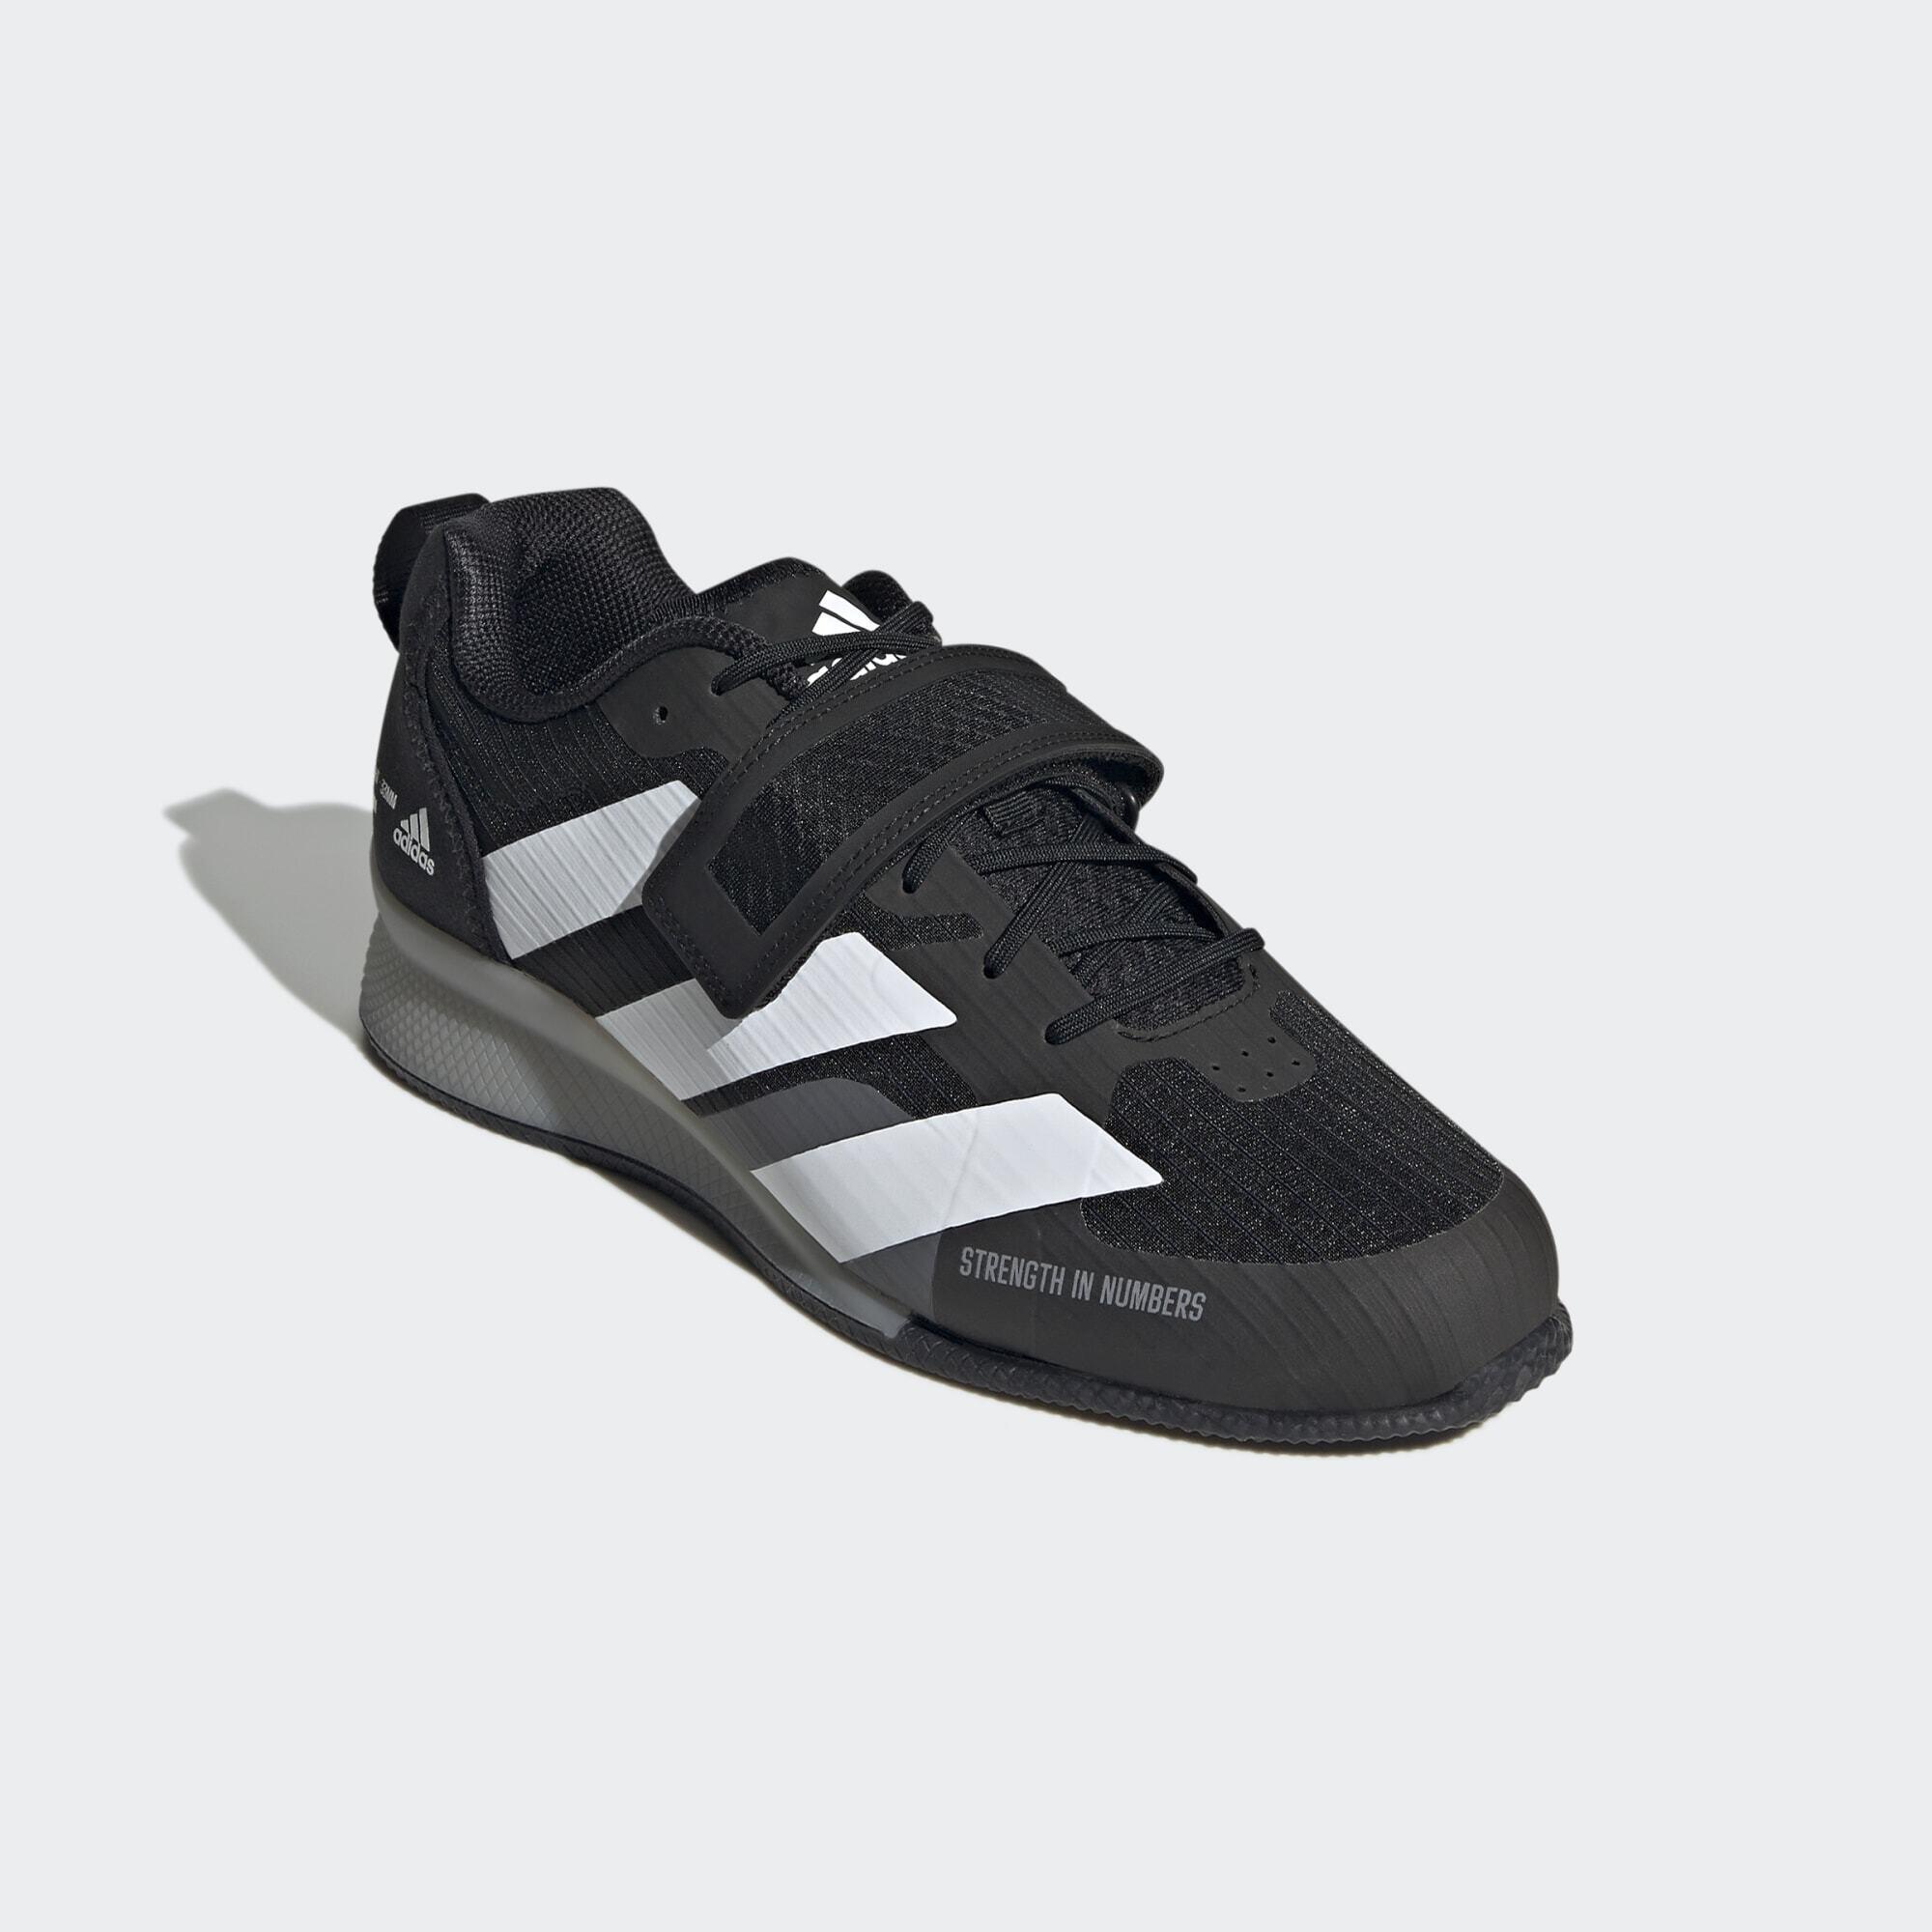 Adipower Weightlifting 3 Shoes 5/7